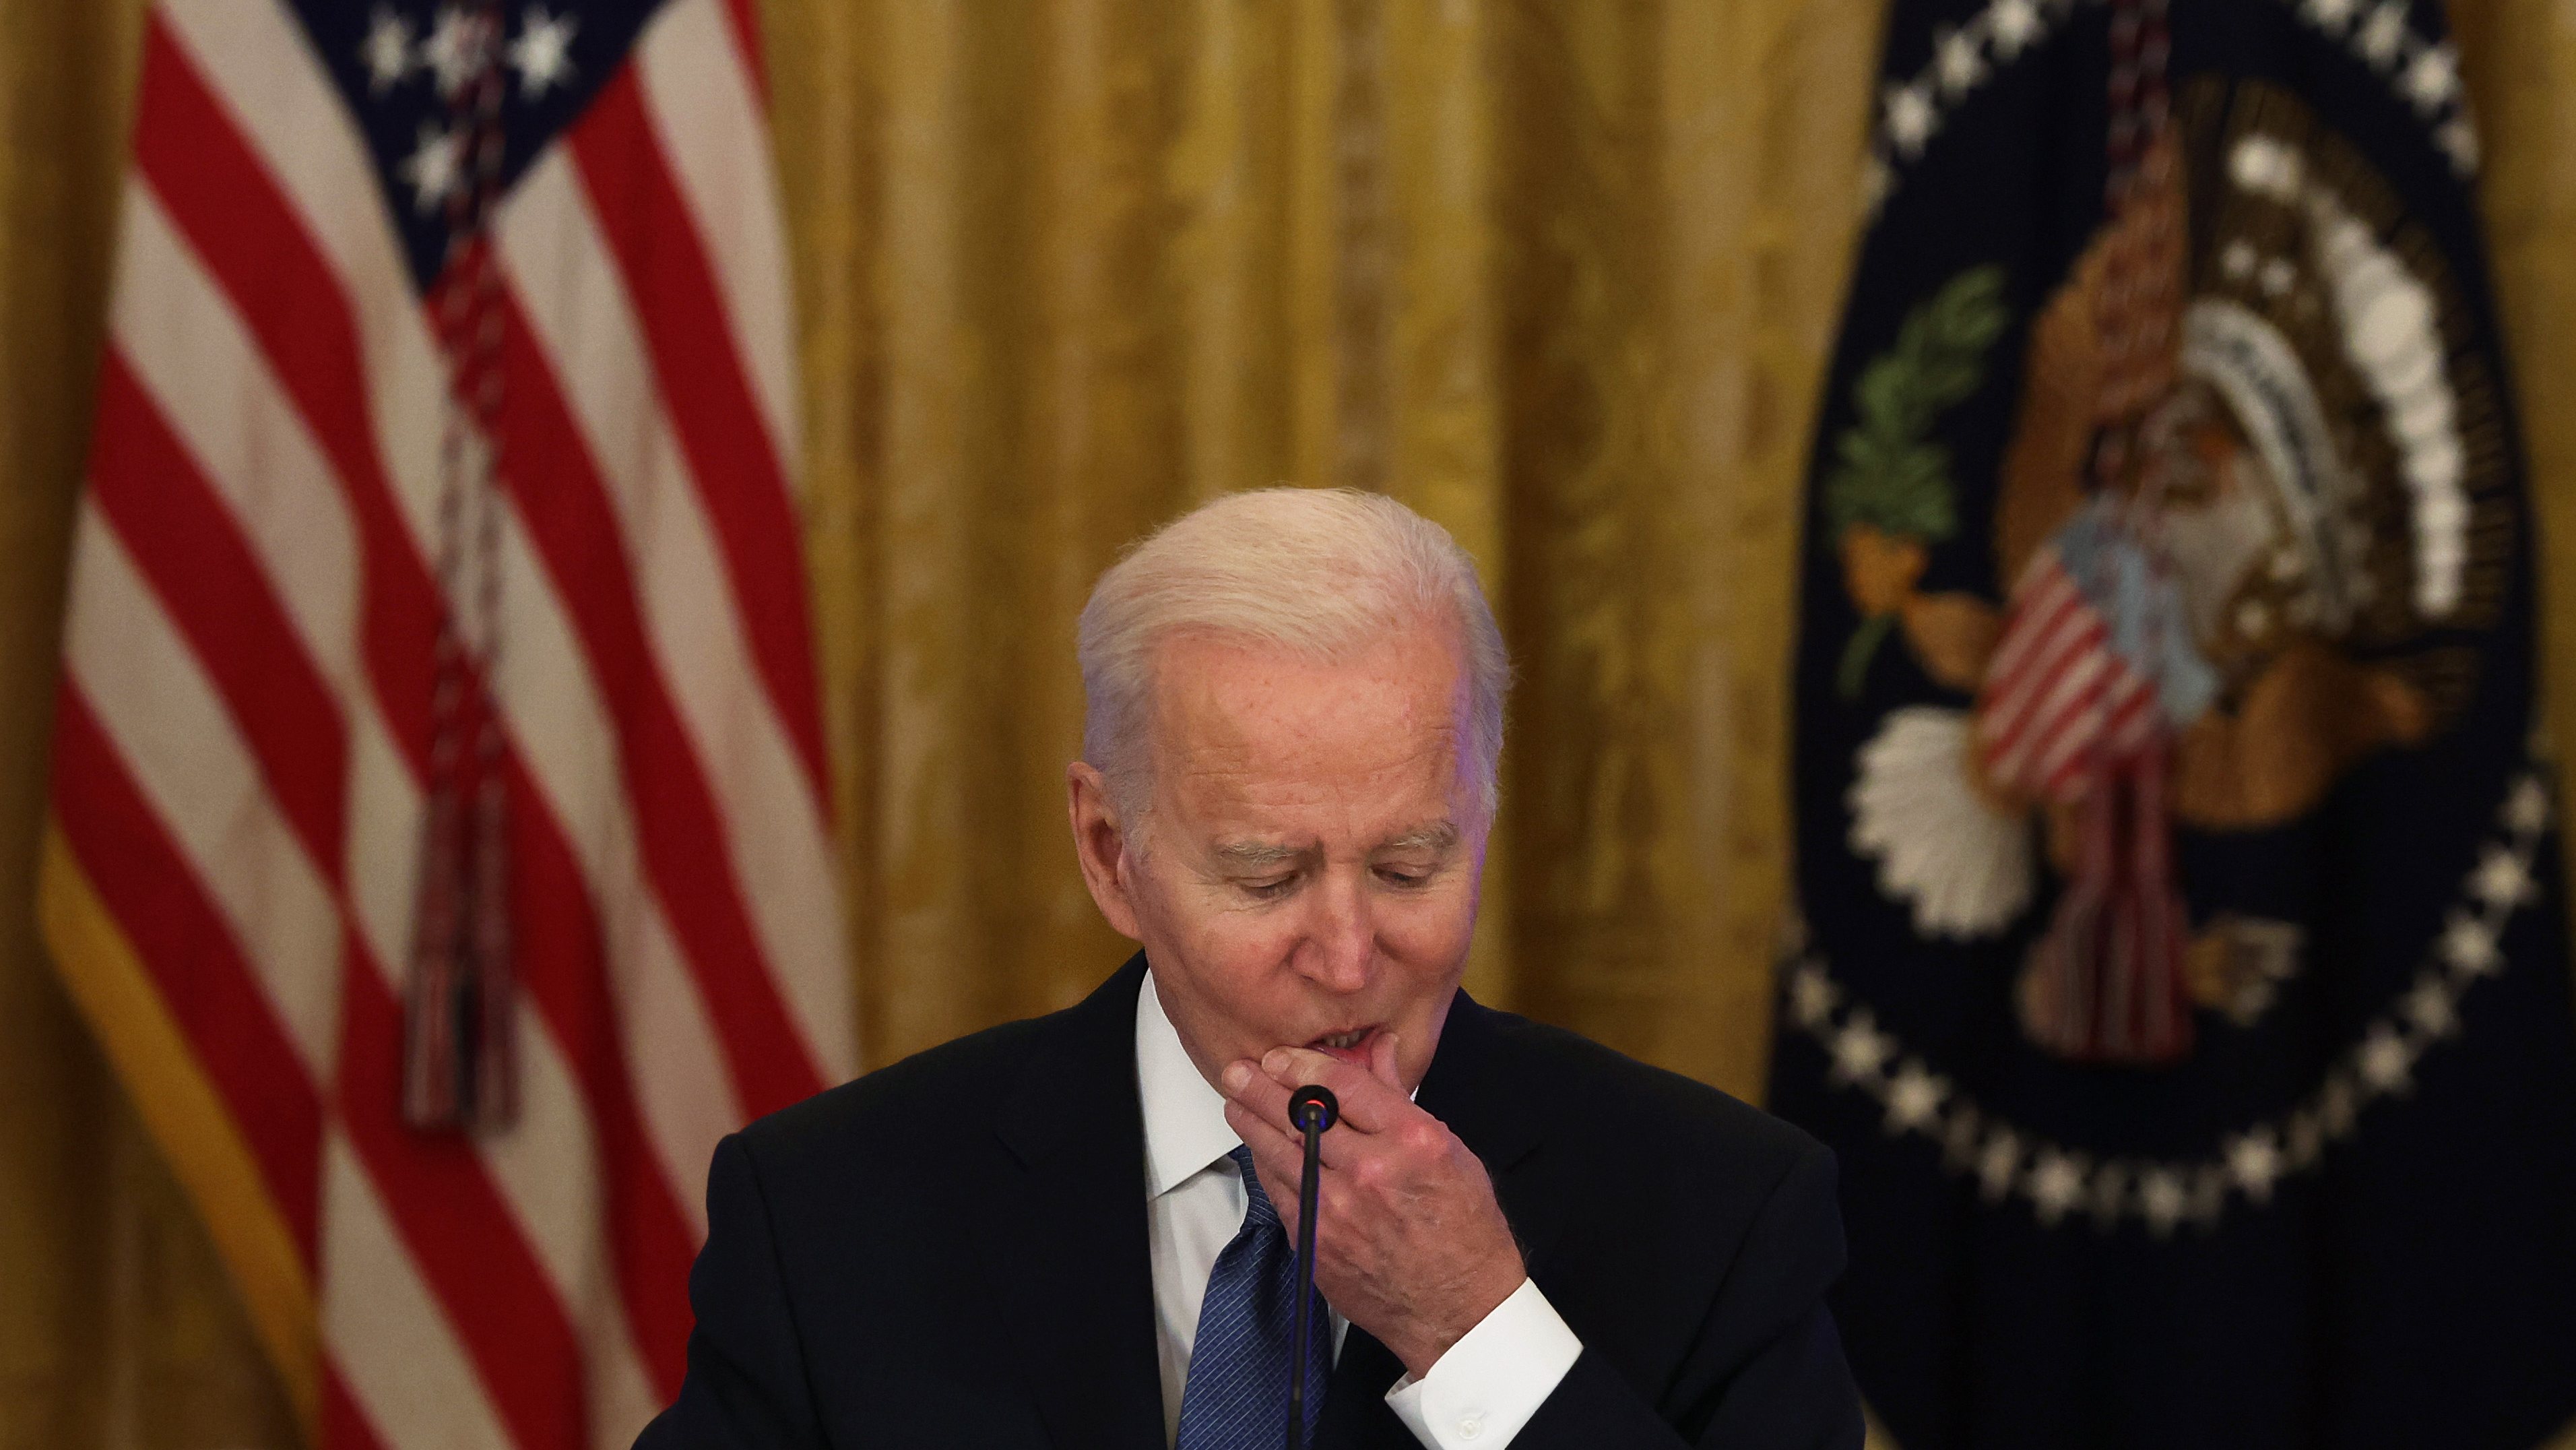 President Biden Discusses Efforts To Lower Prices For Families